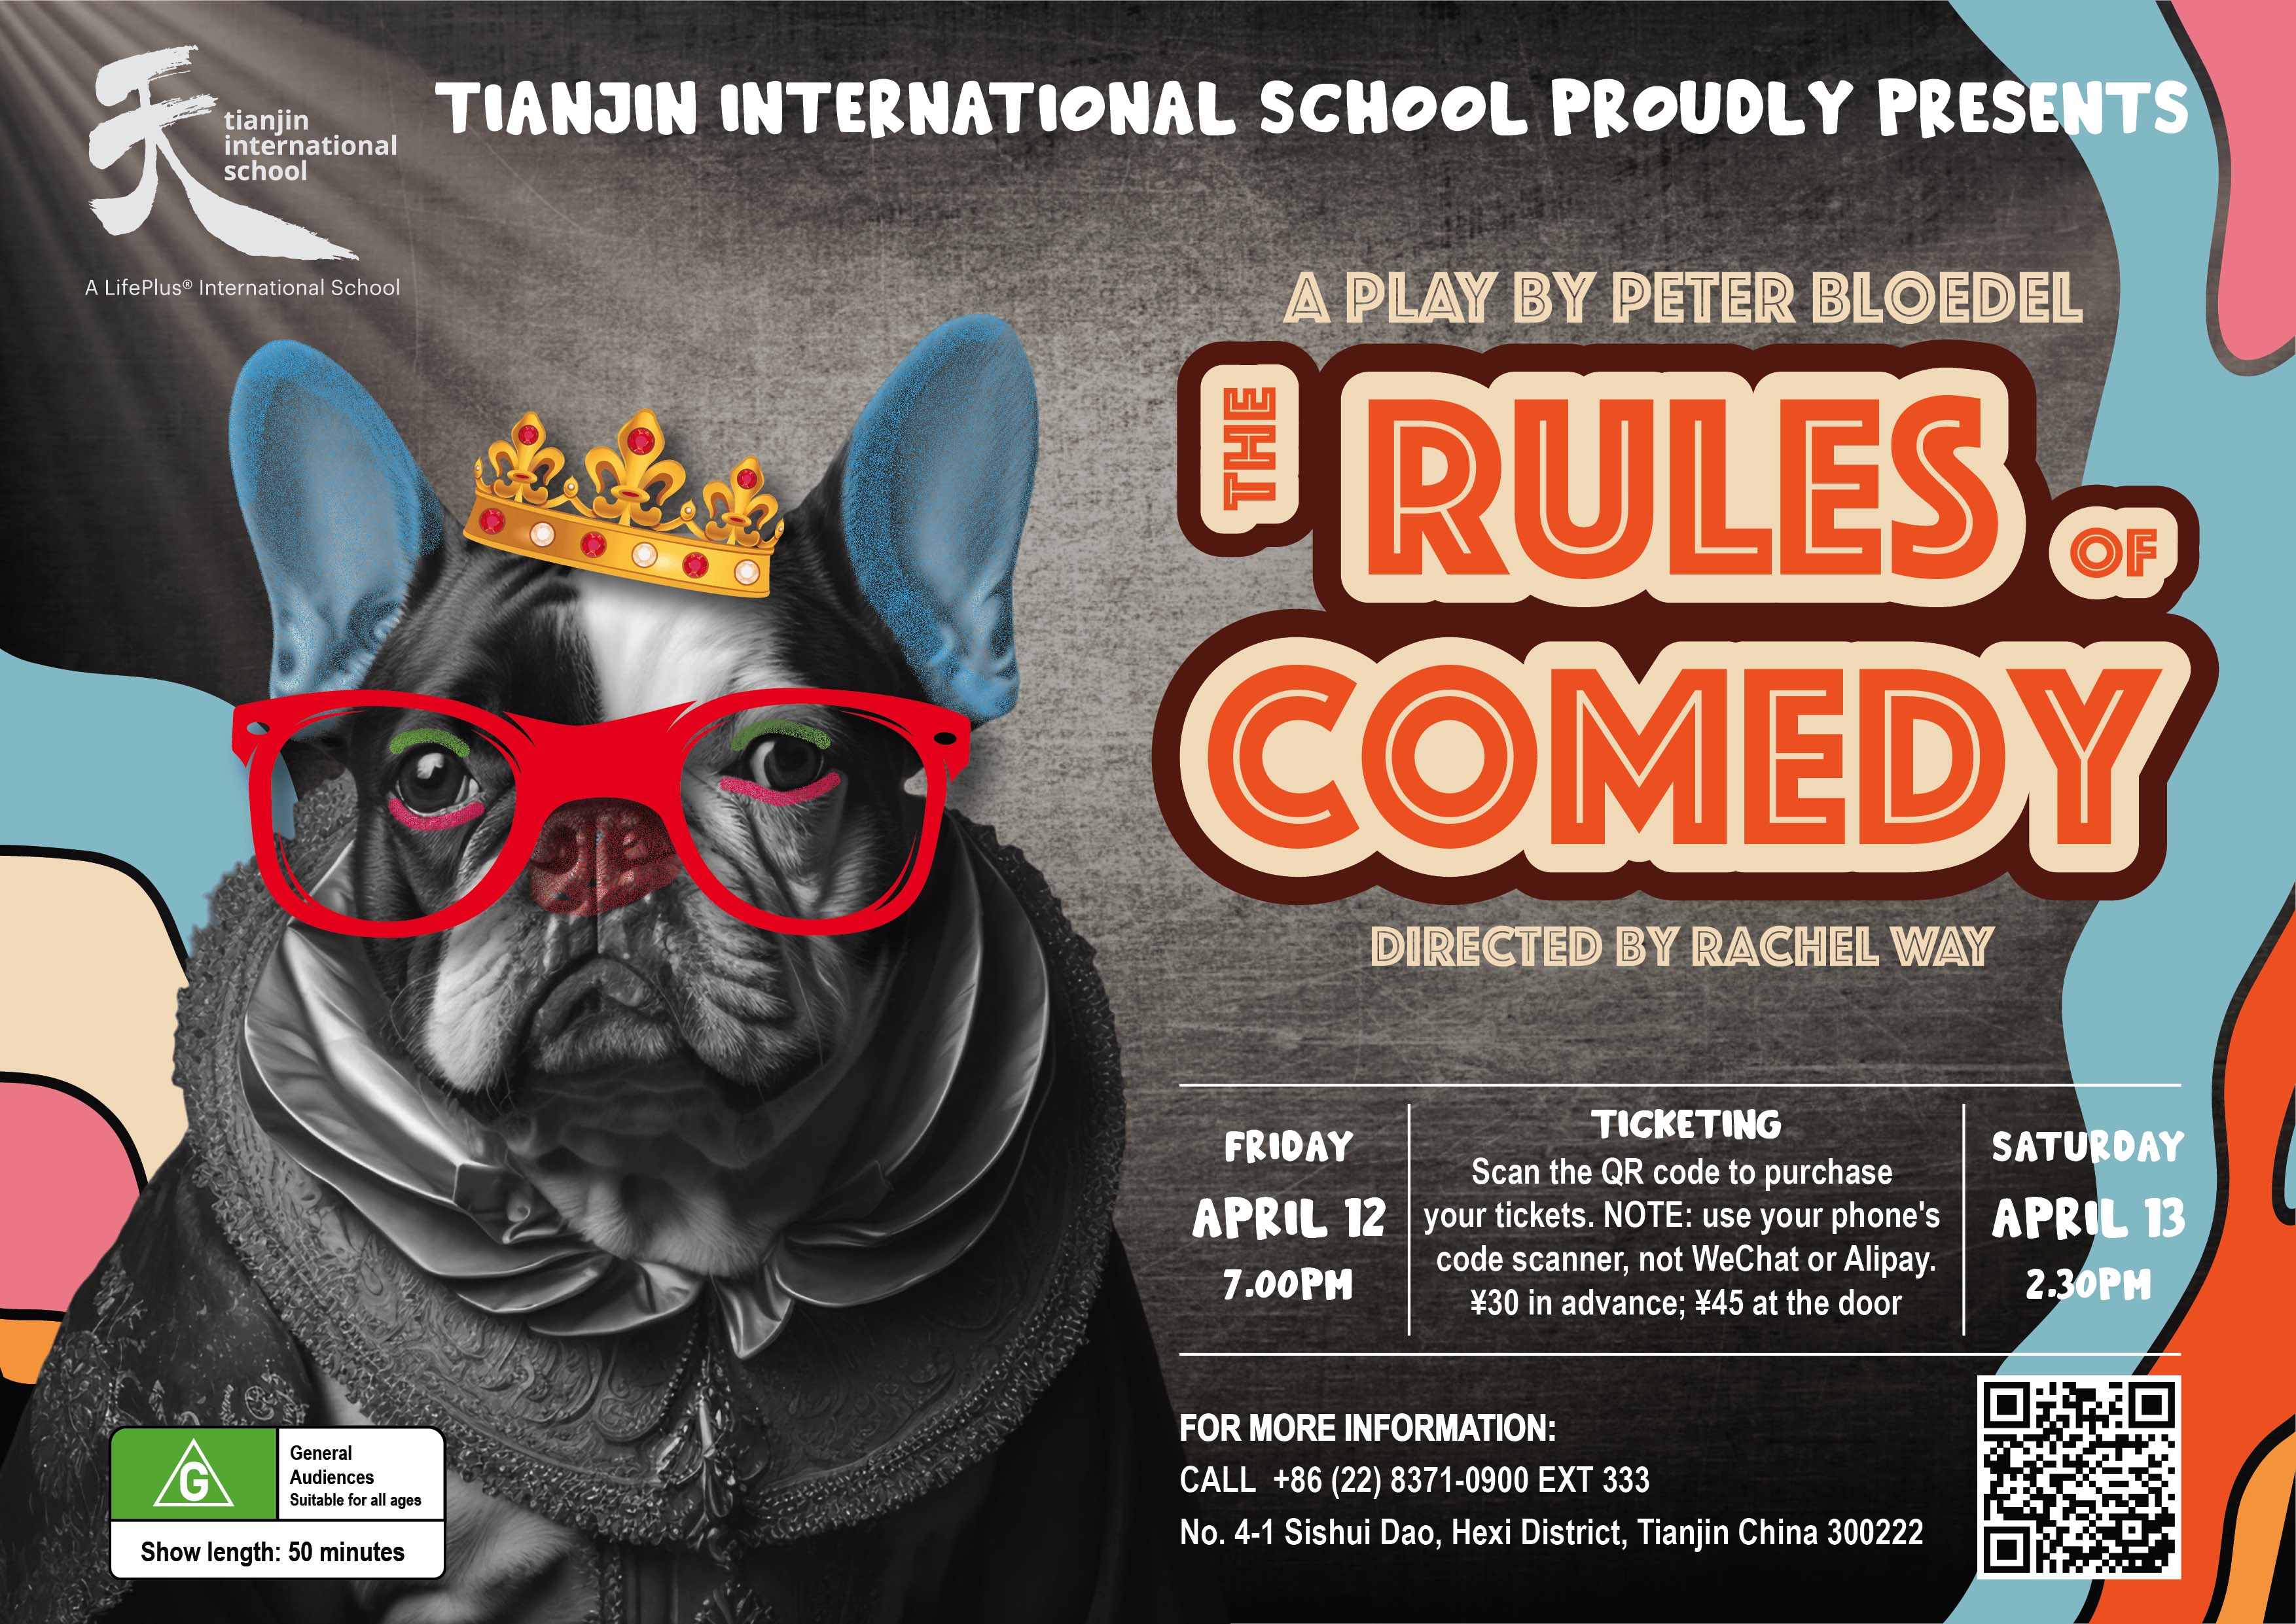 The Rules of Comedy - Saturday, April 13, 2:30pm. 星期六 4月13日 下午2:30